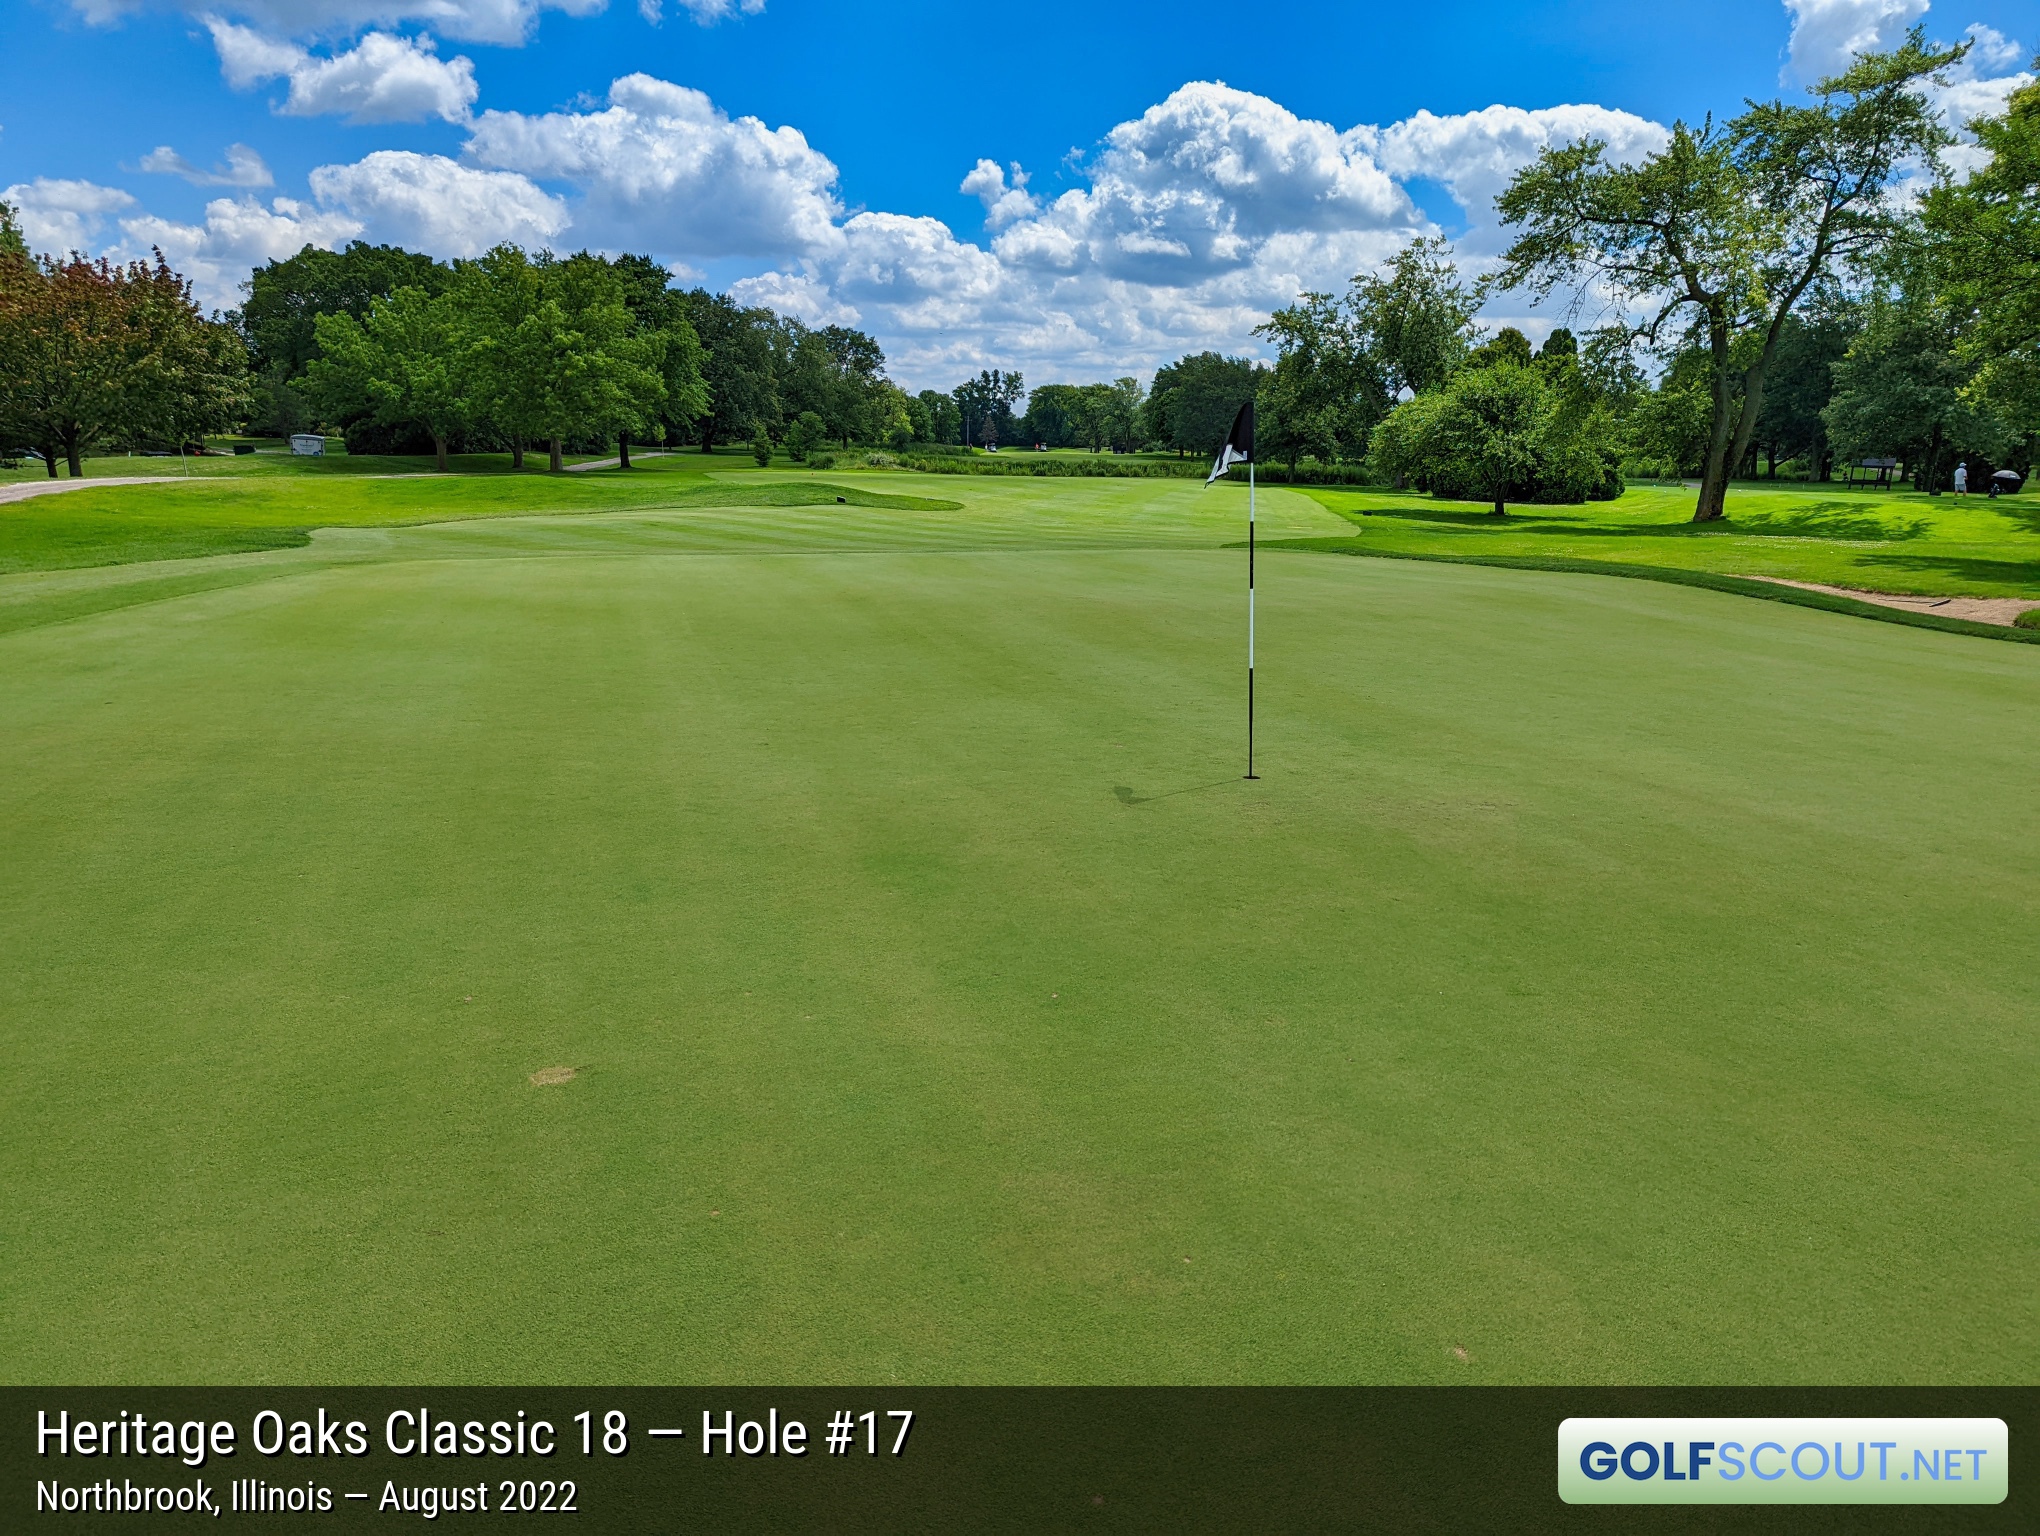 Photo of hole #17 at Heritage Oaks Golf Club - Classic 18 in Northbrook, Illinois. 